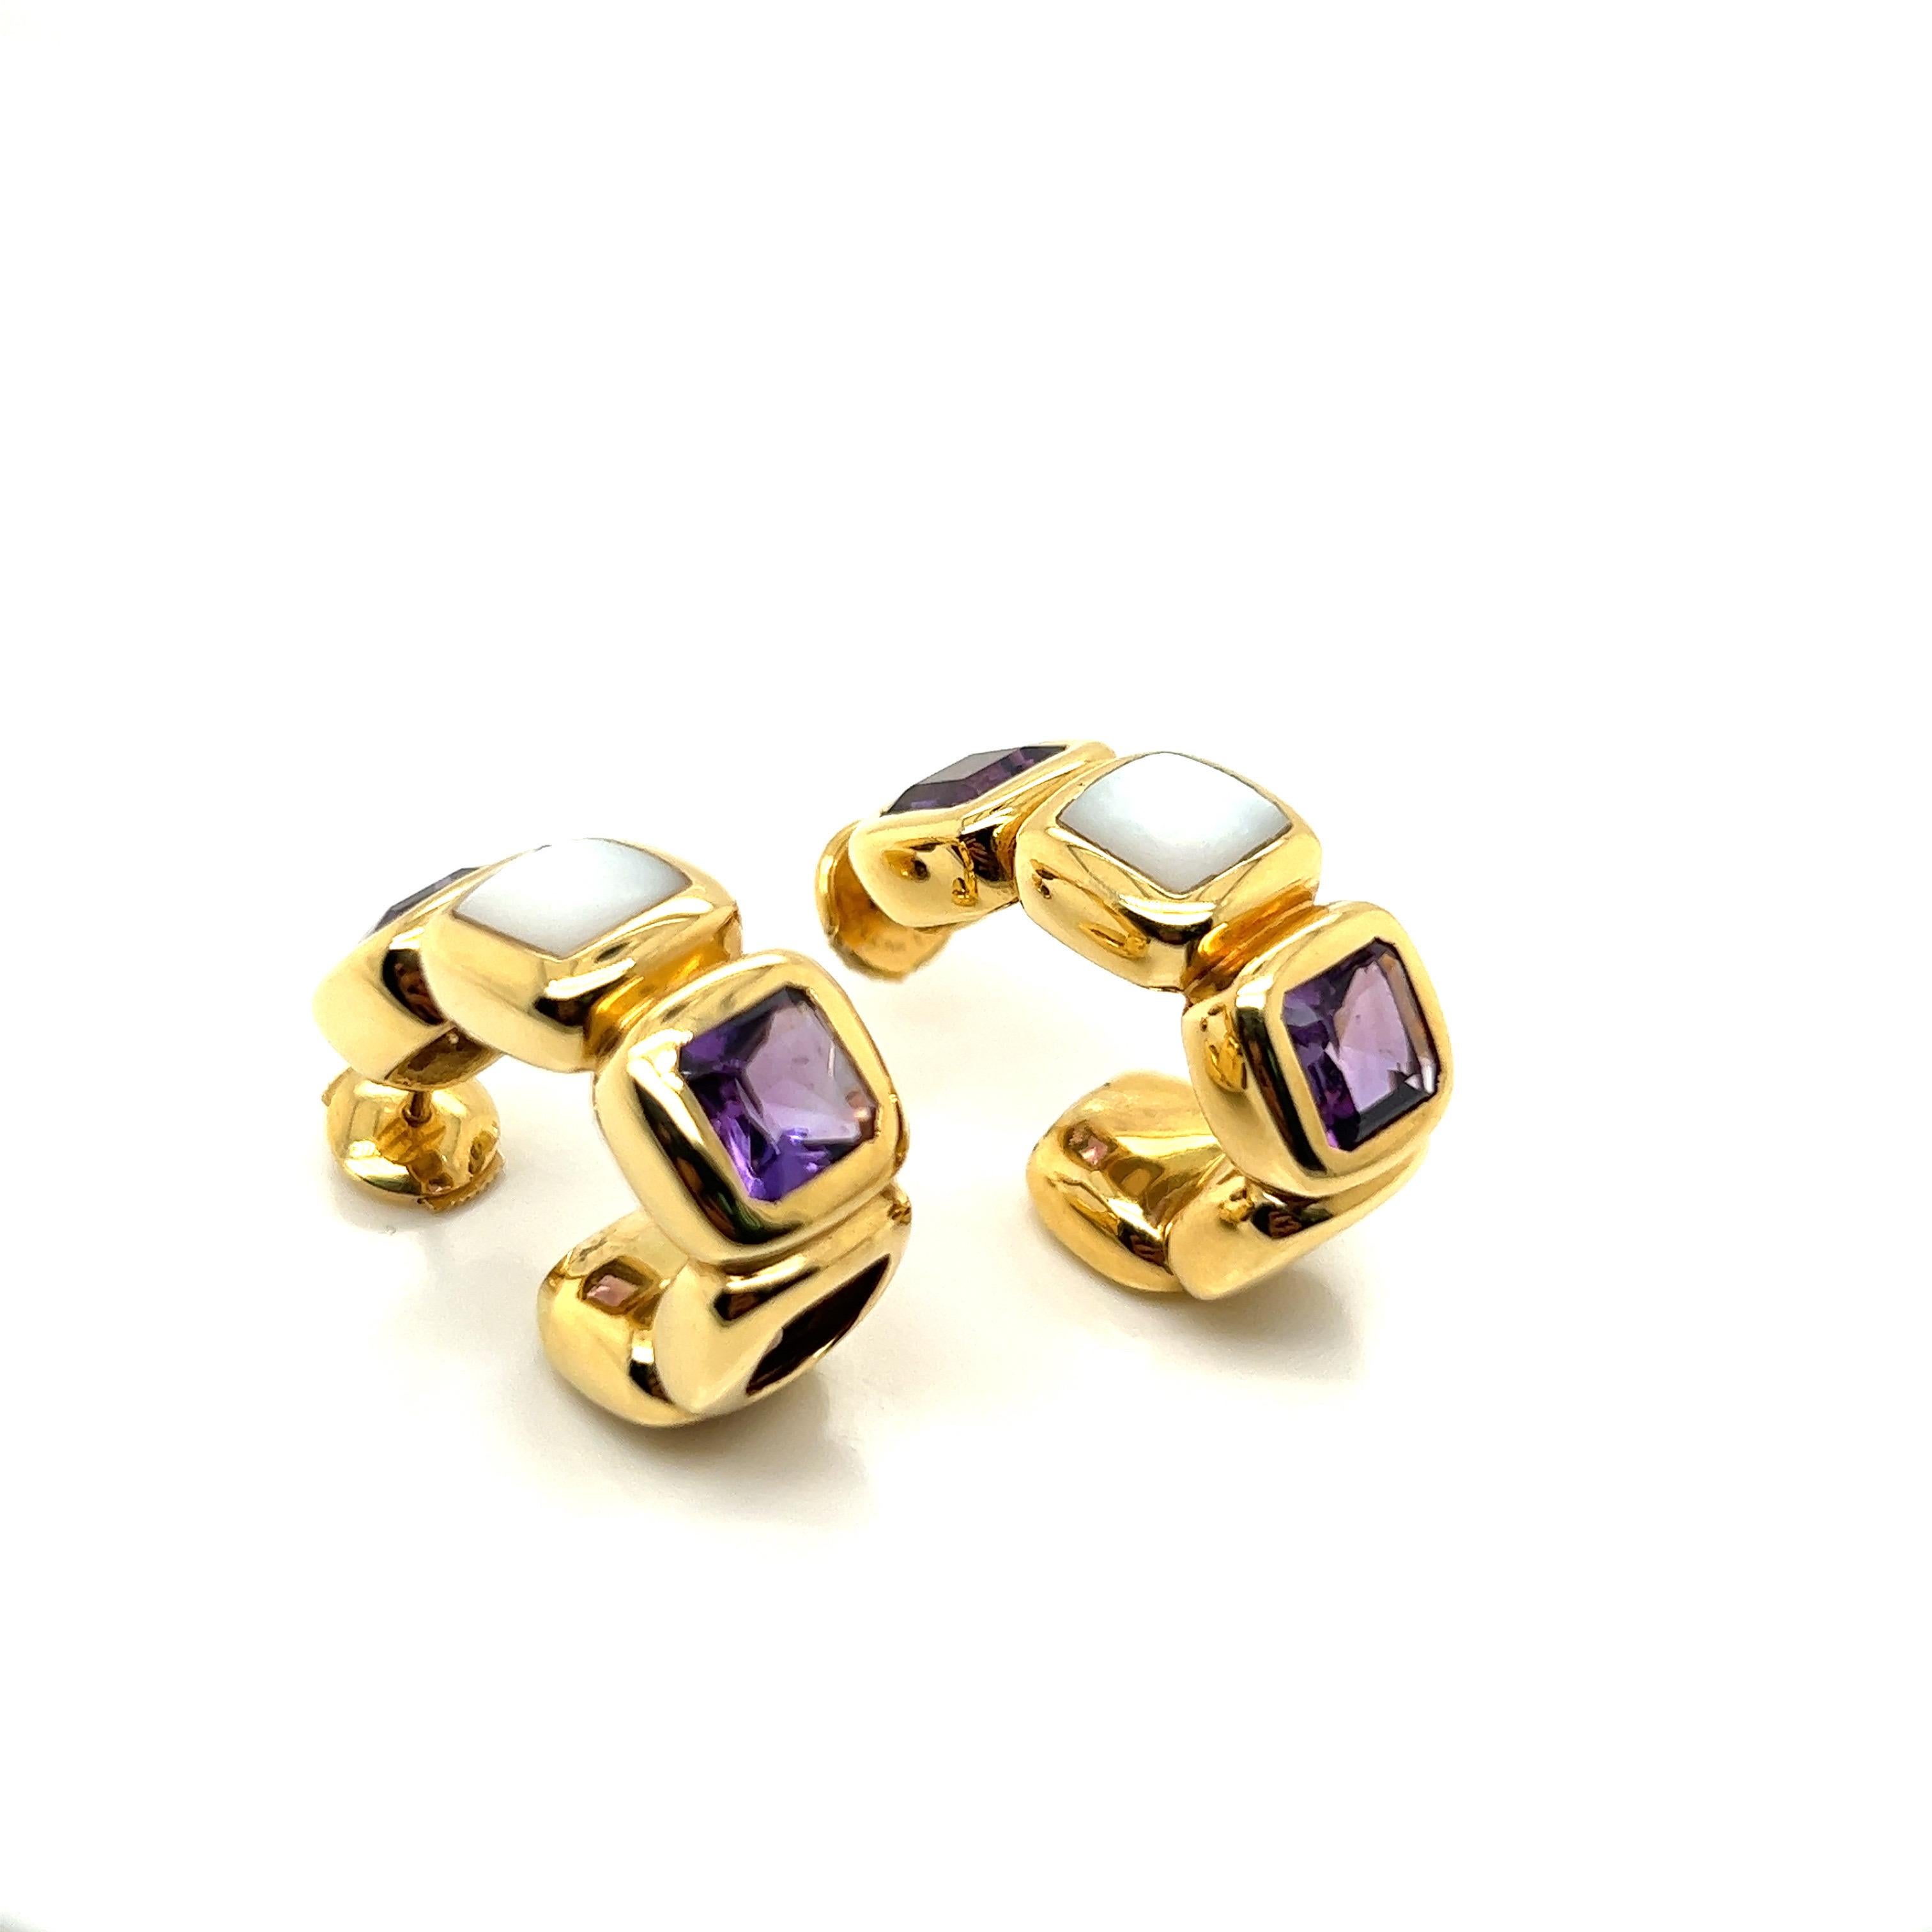 A pair of half-creole earrings 
18K yellow gold with white mother-of-pearl and amethysts. 
Weight: 21,1 grams.
Length: 26 mm.
Width: 10 mm.
Height : 19 mm.